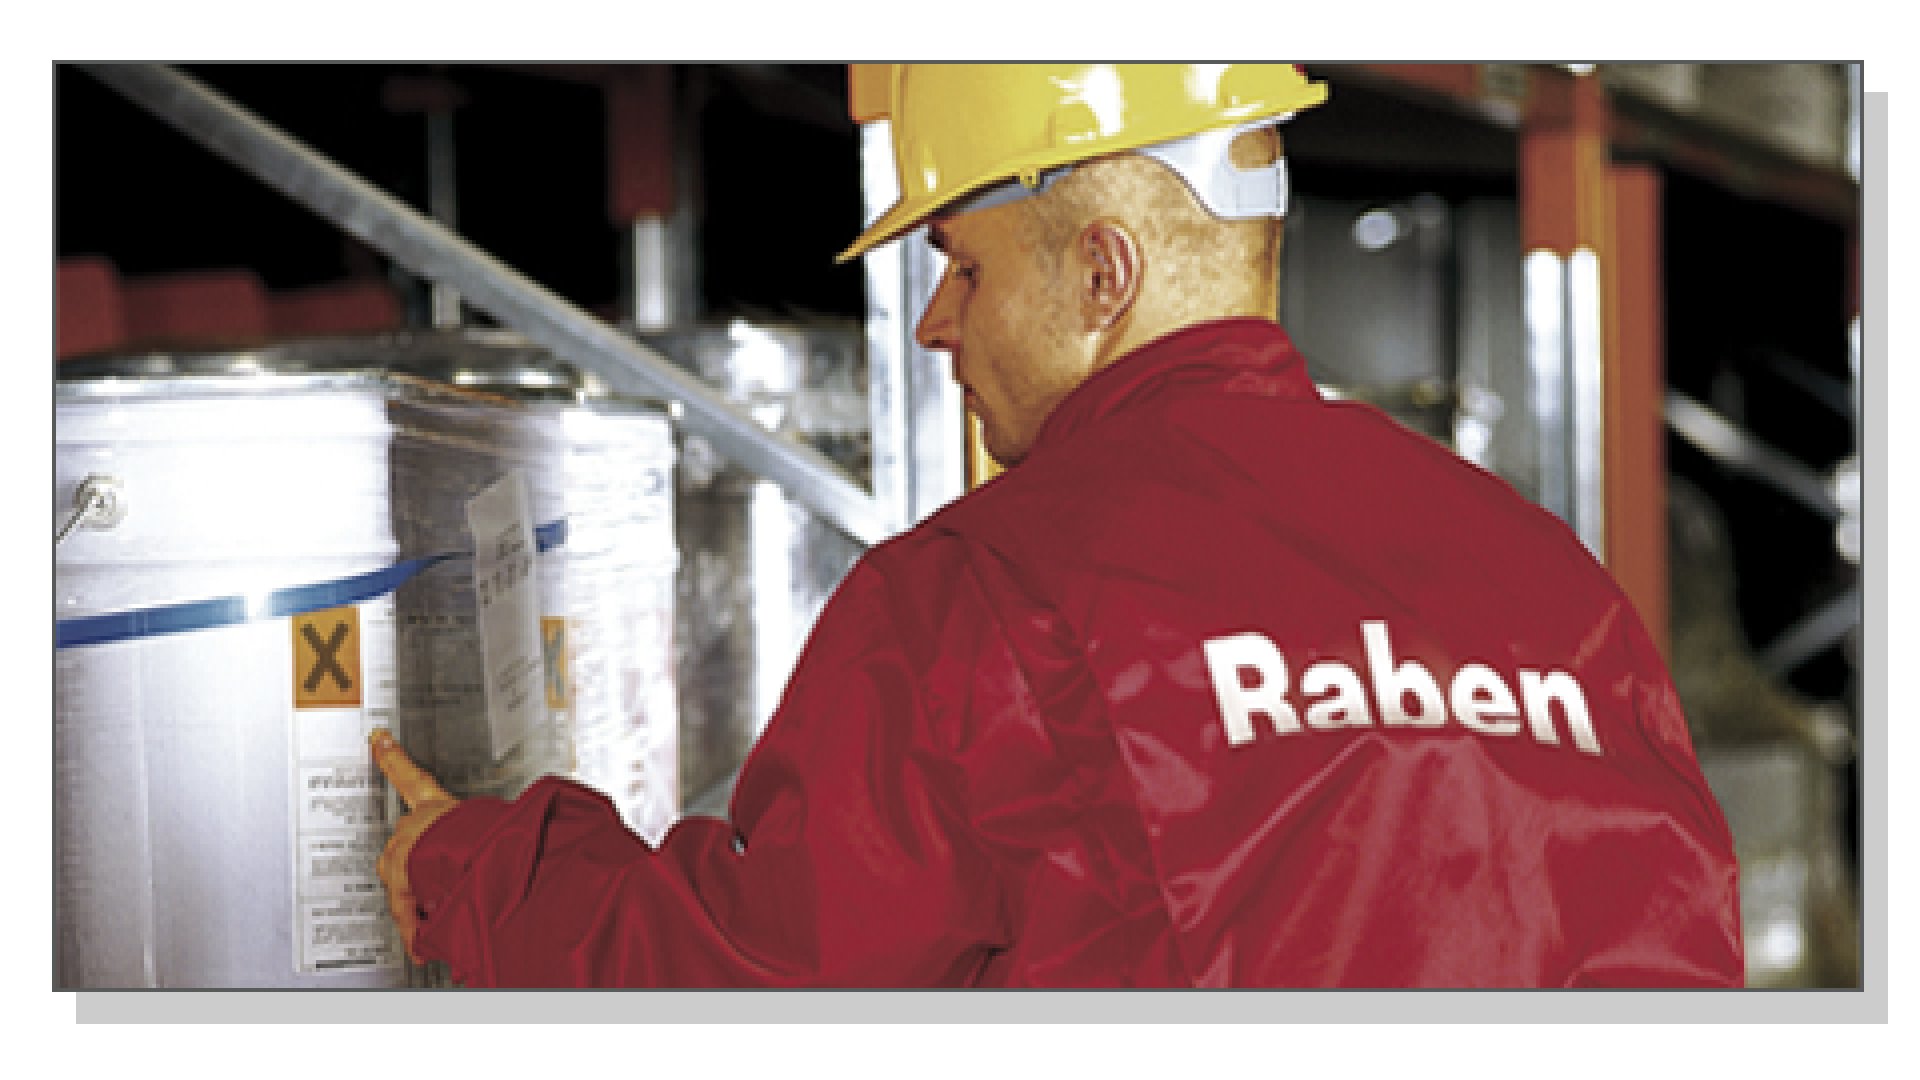 HUNDREDS OF MILLIONS INVESTED AT RABEN TRANS EUROPEAN HUNGARY LTD.